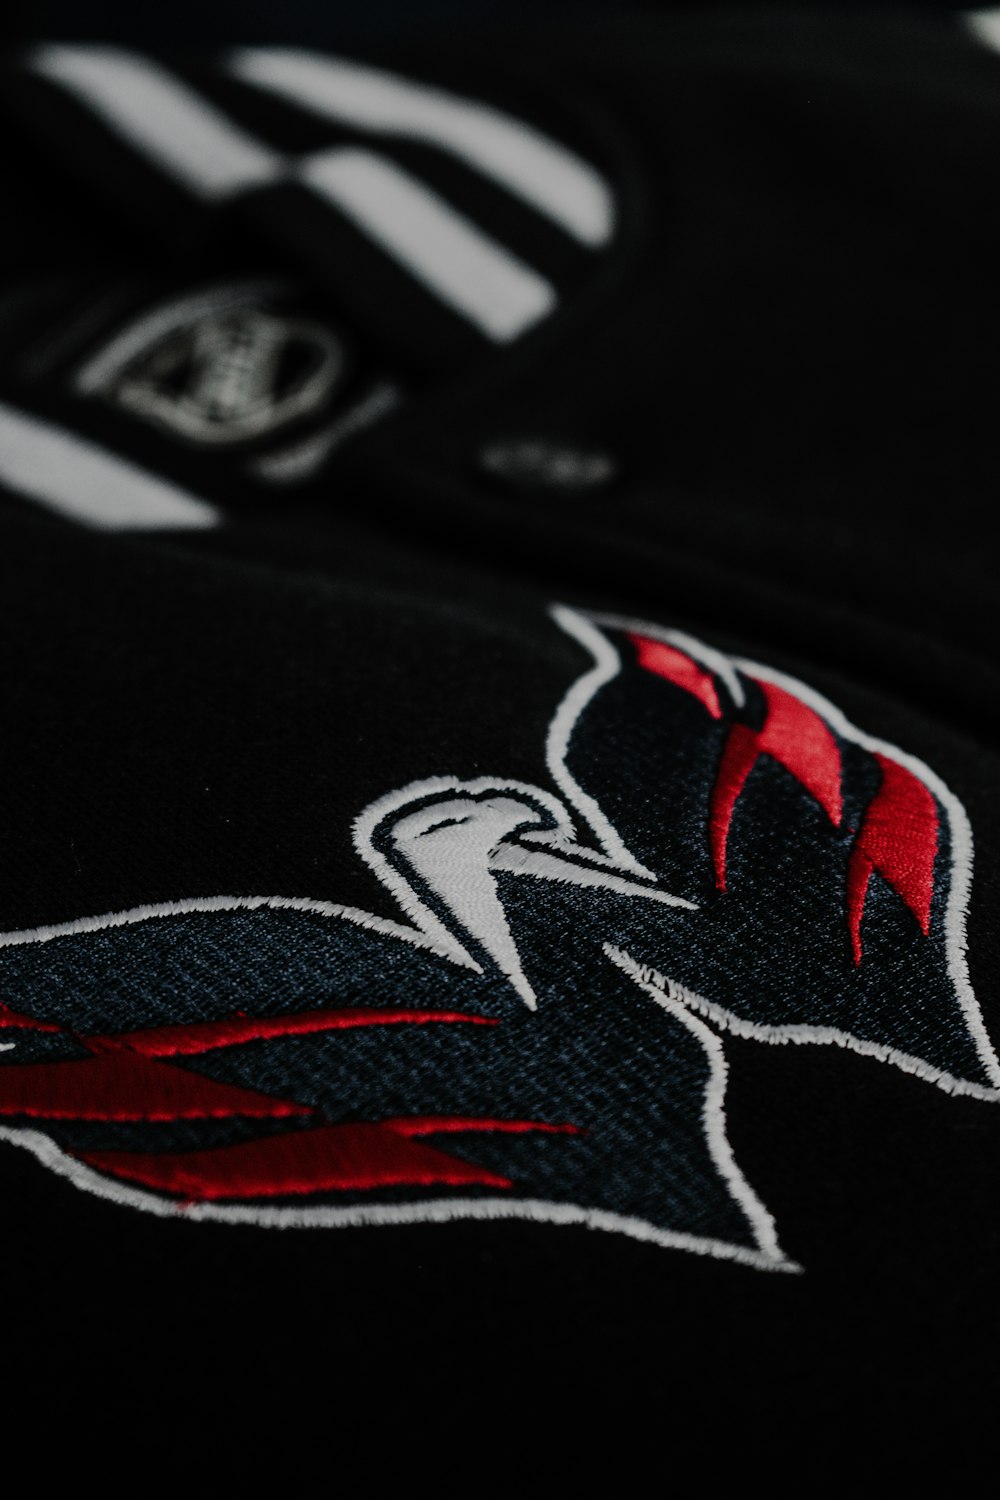 a close up of a baseball jersey with an eagle on it